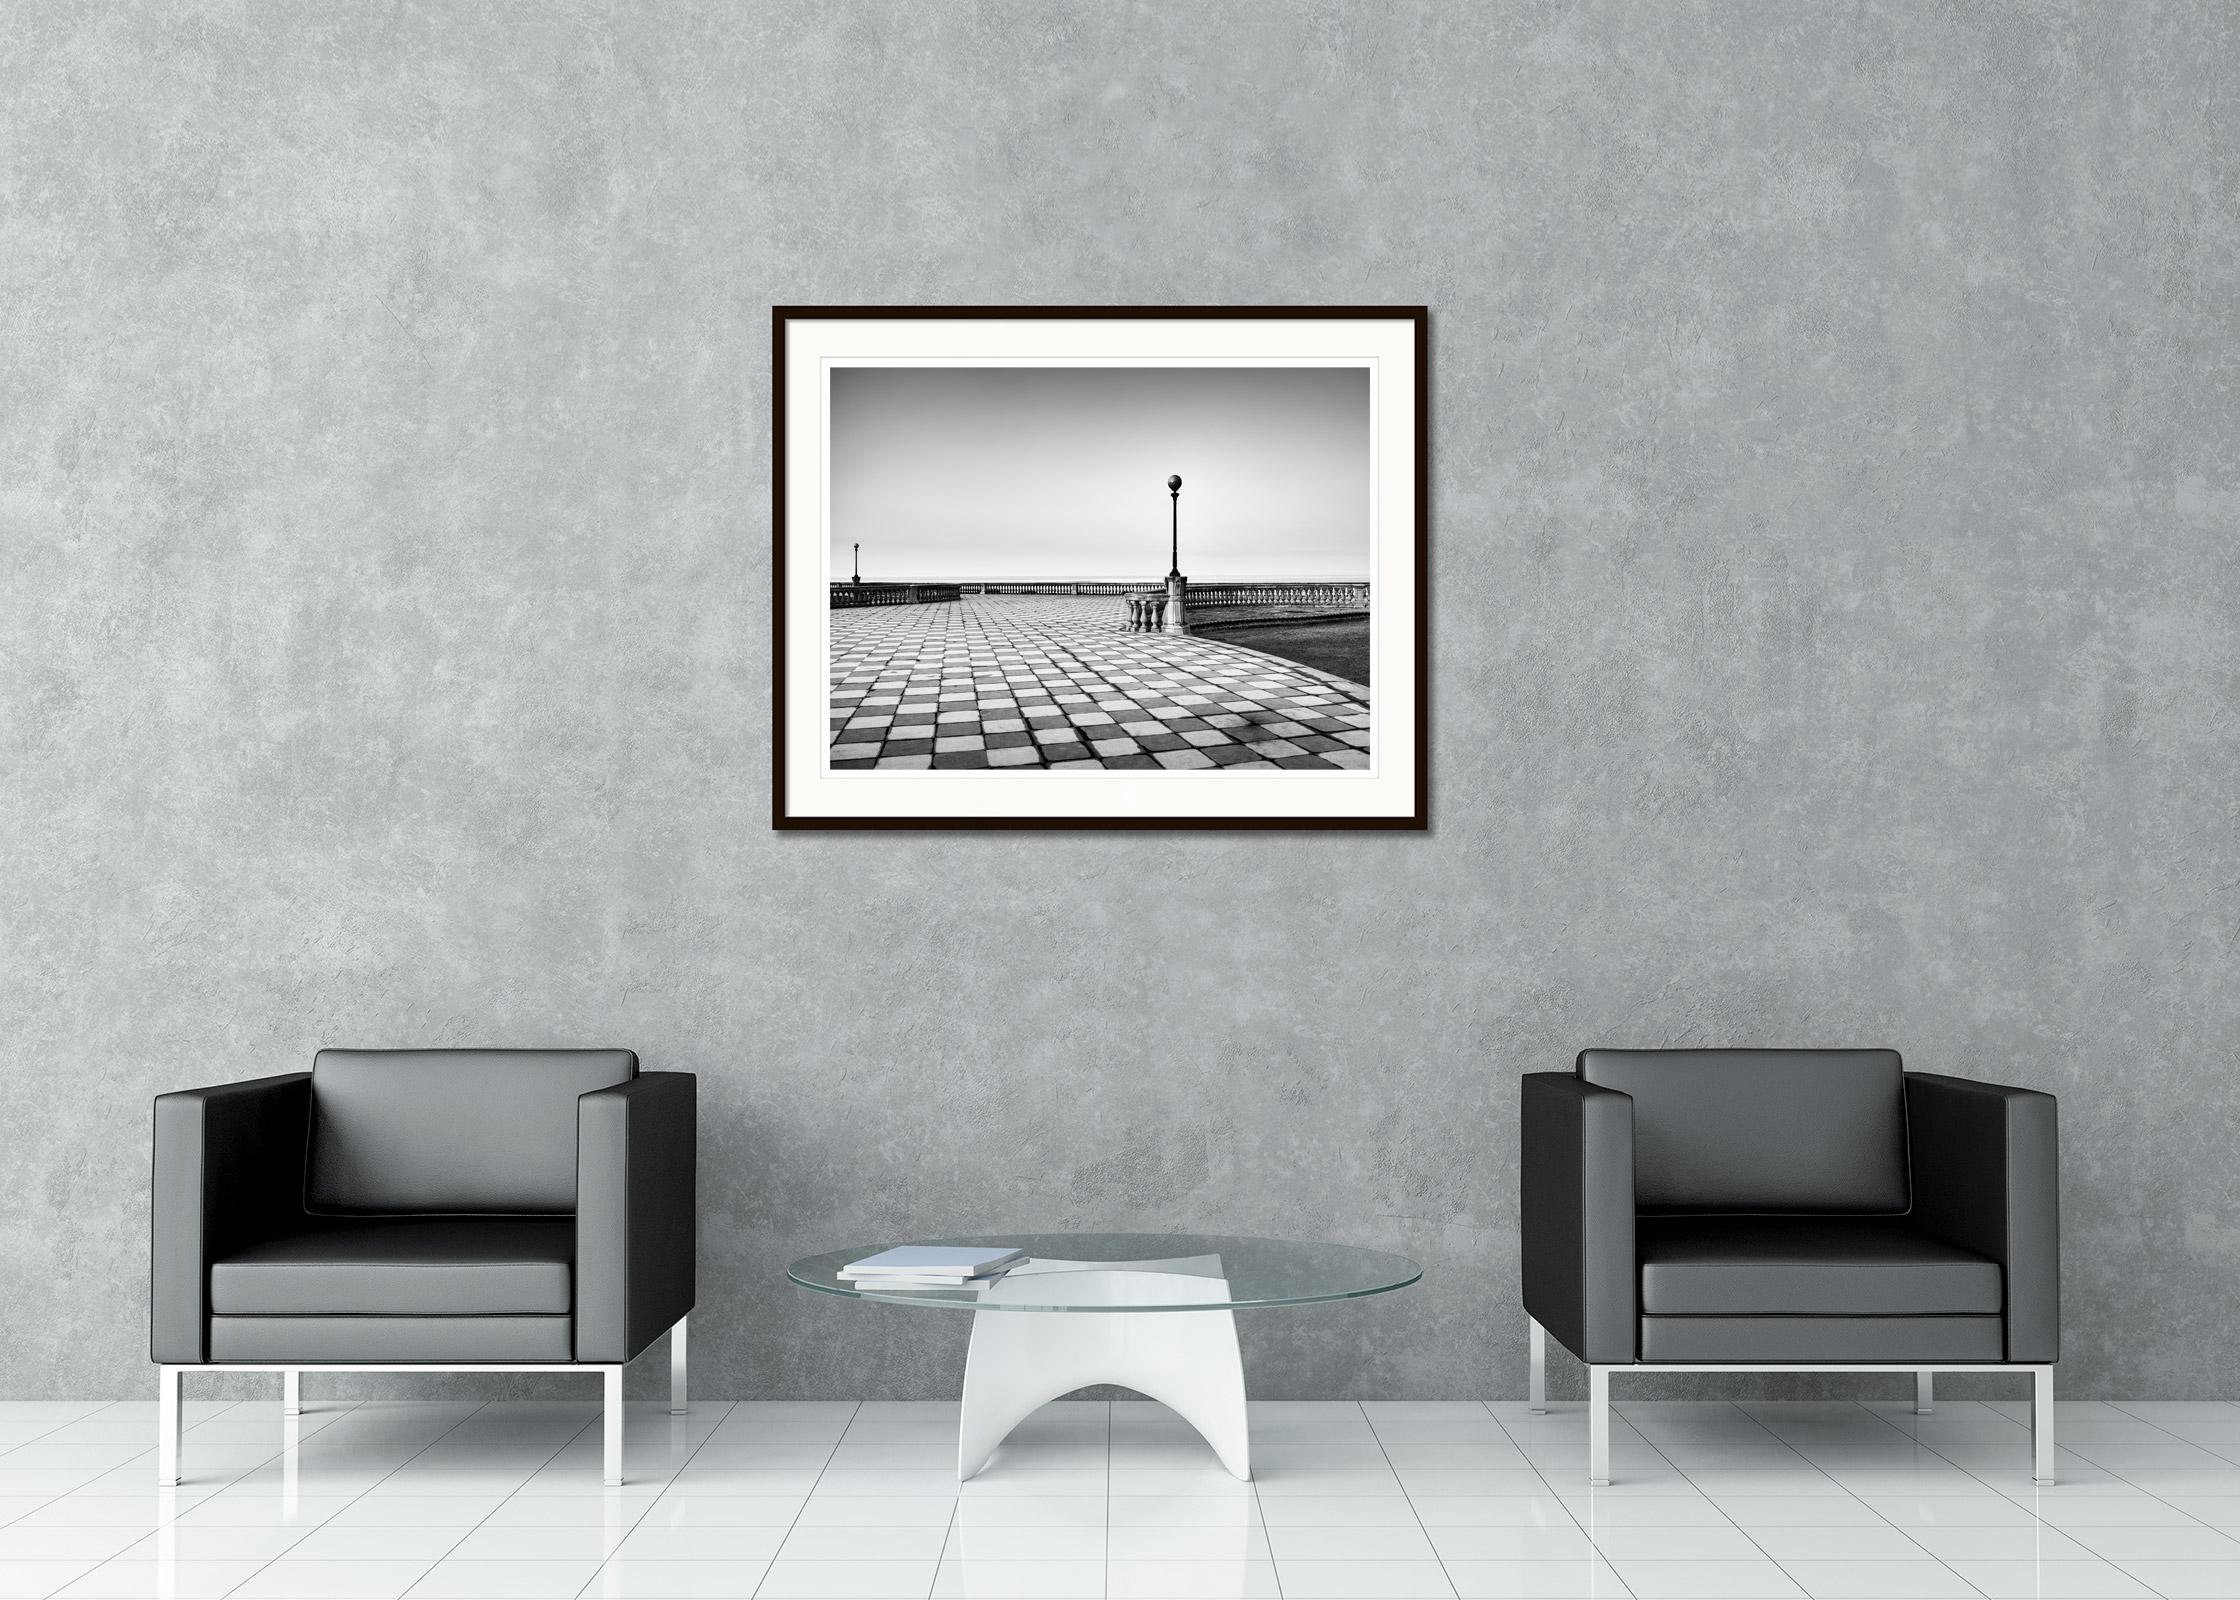 Black and white fine art cityscape - landscape photography. Archival pigment ink print as part of a limited edition of 8. All Gerald Berghammer prints are made to order in limited editions on Hahnemuehle Photo Rag Baryta. Each print is stamped on